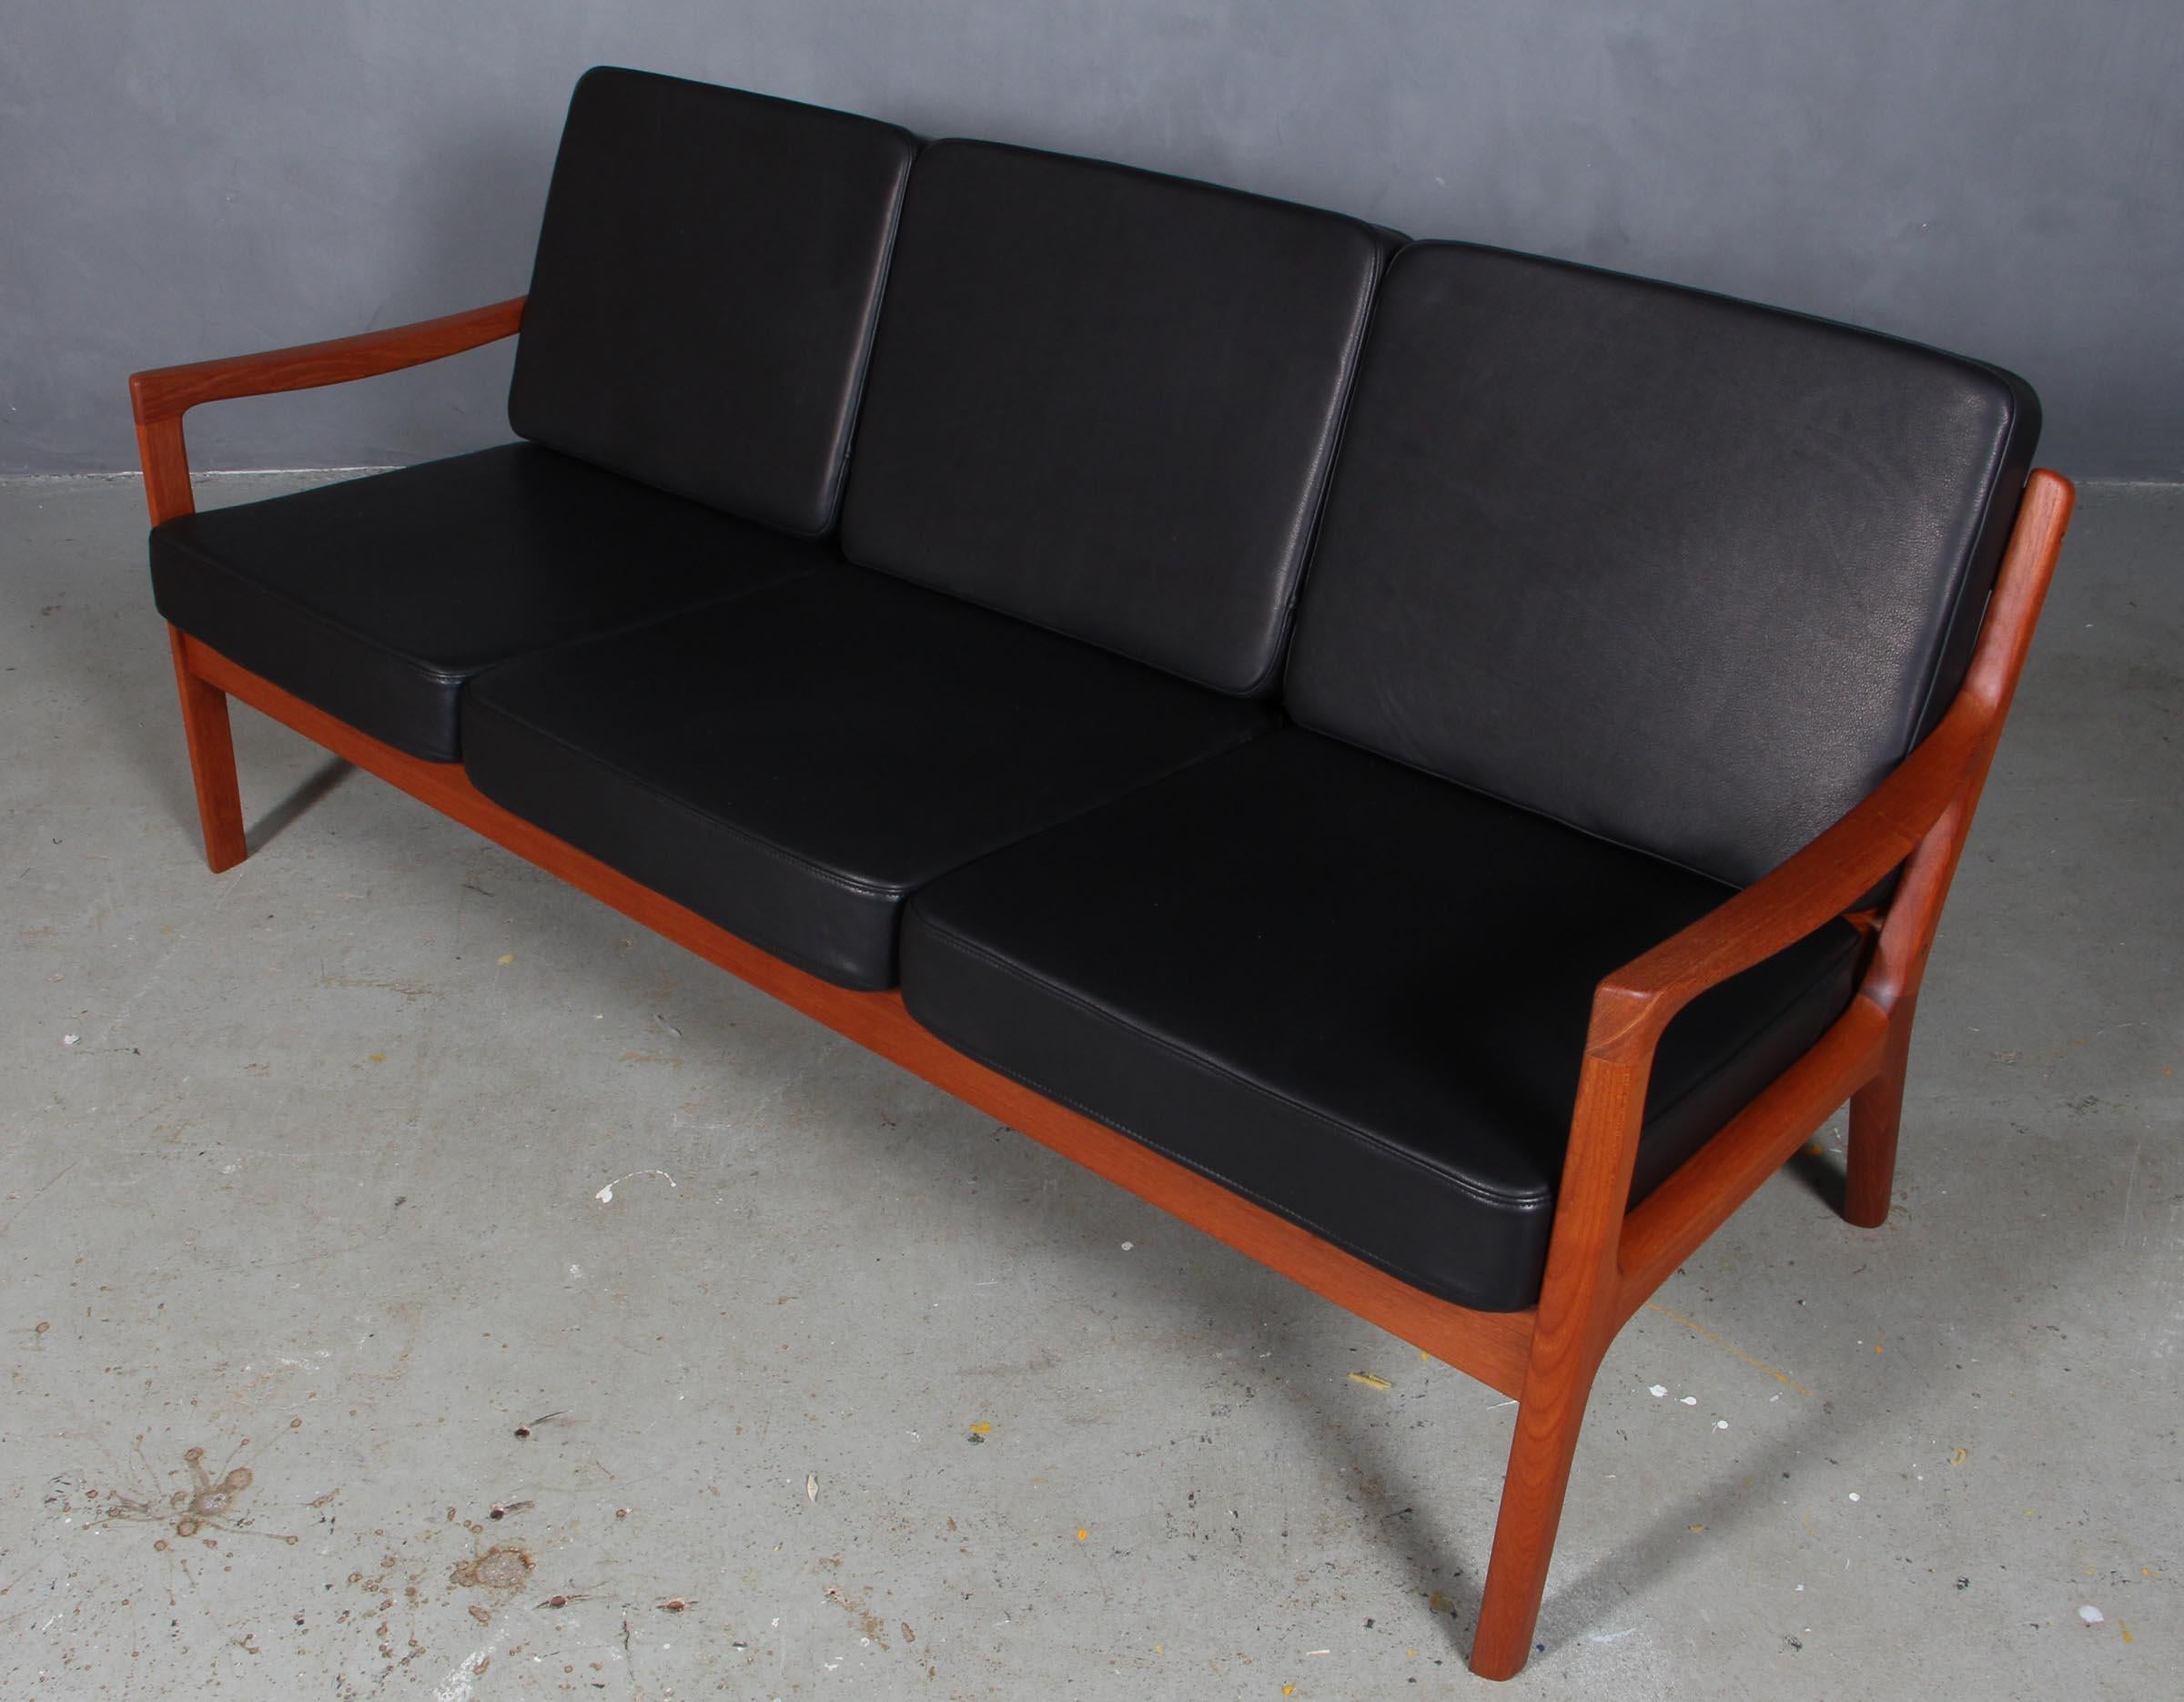 Ole Wanscher three-seat sofa new upholstered with black Envy aniline leather from Arne Sørensen.

Made of solid teak.

Model senator, made by Cado.